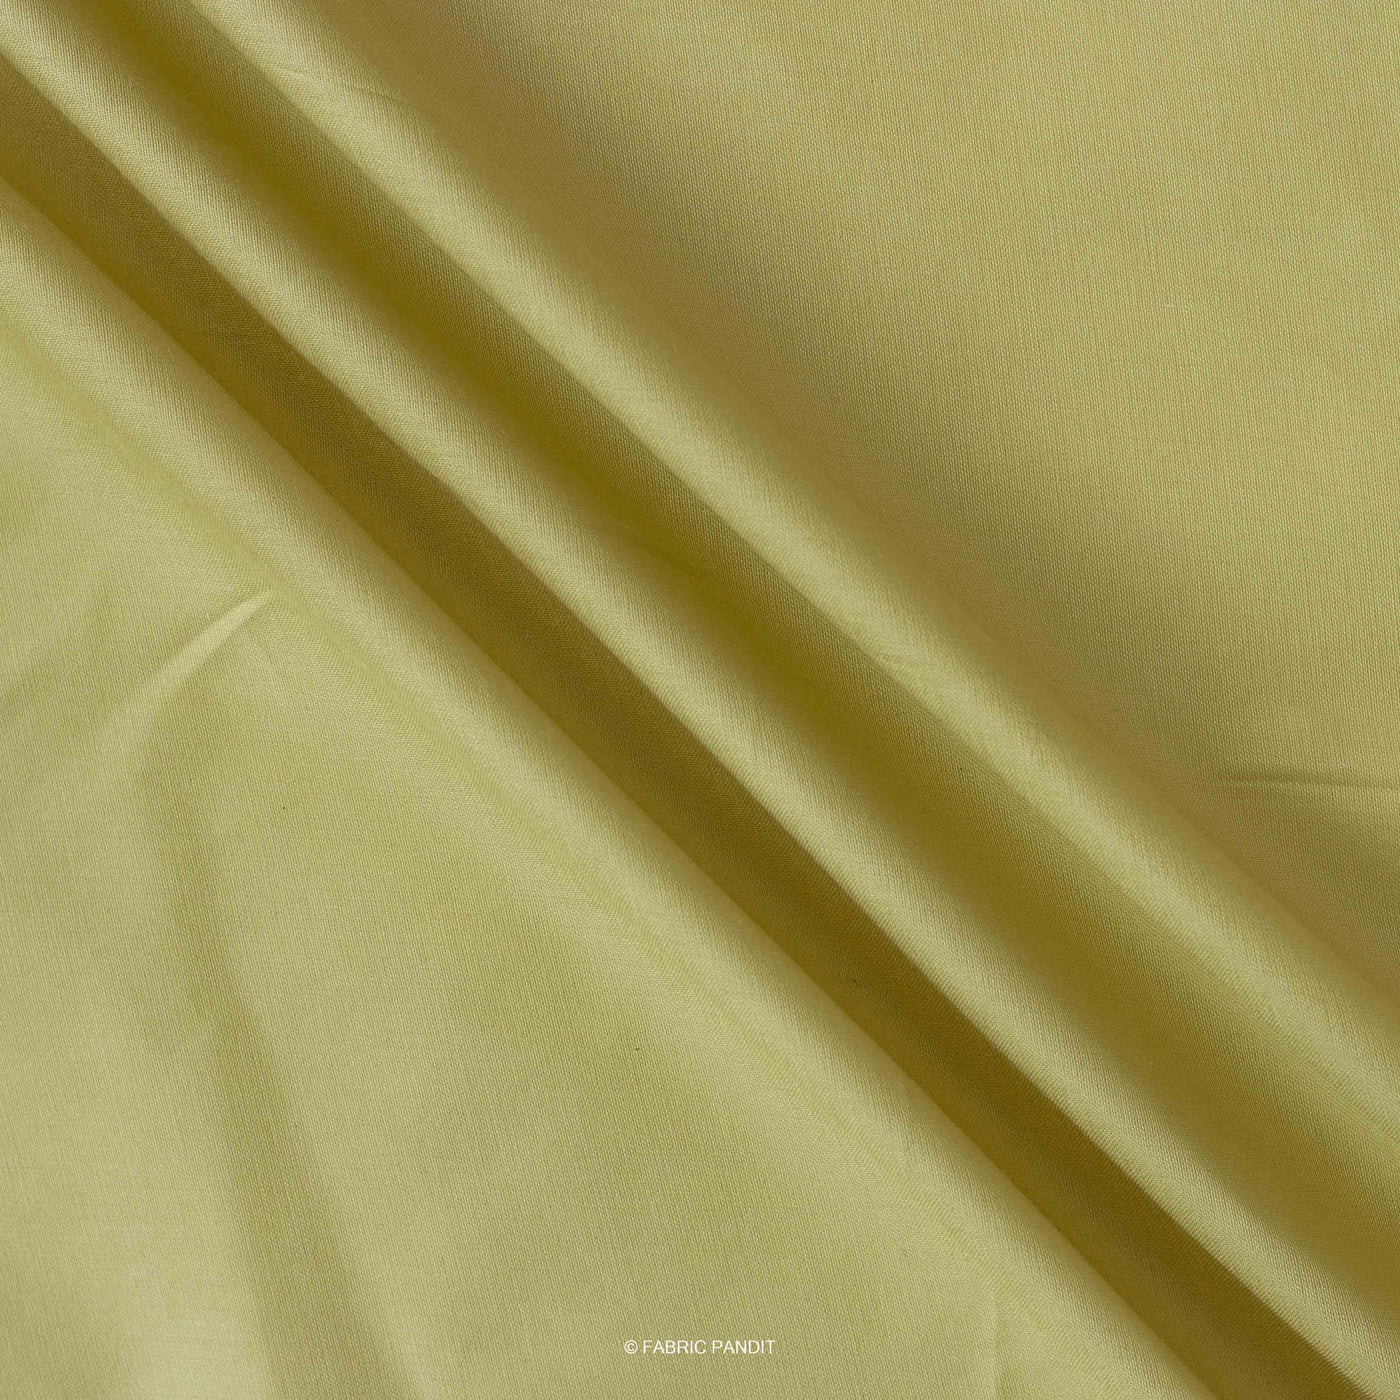 Fabric Pandit Fabric Dusty Green Color Plain Cotton Satin Fabric (Width 42 Inches)